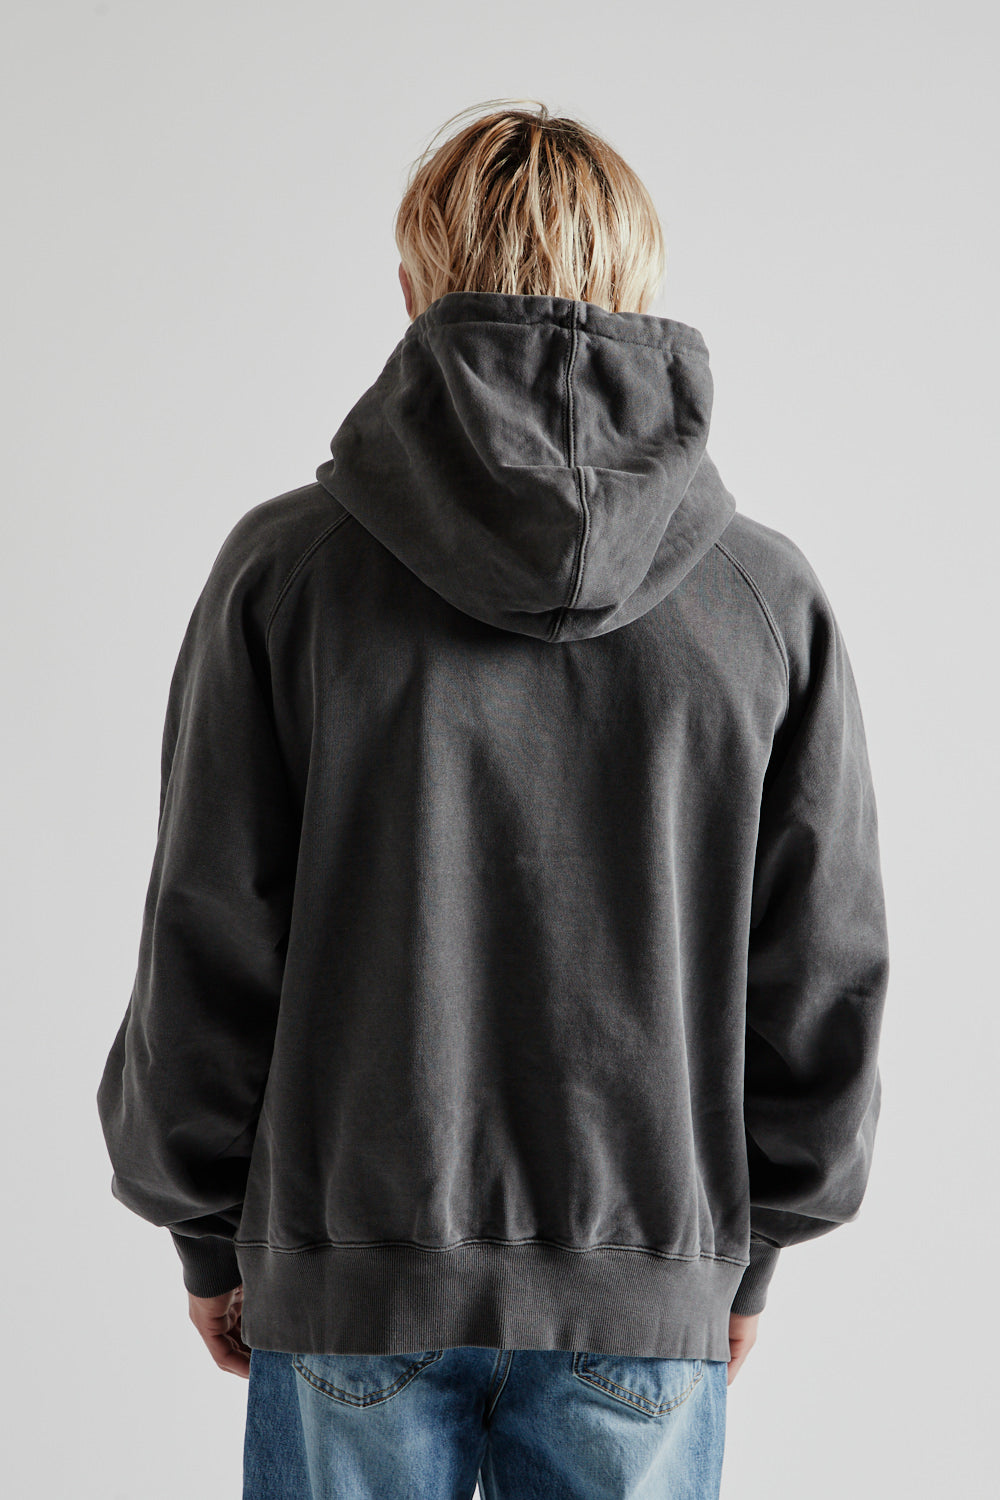 Frizmworks OG Pigment Dyeing Hoodie in Charcoal